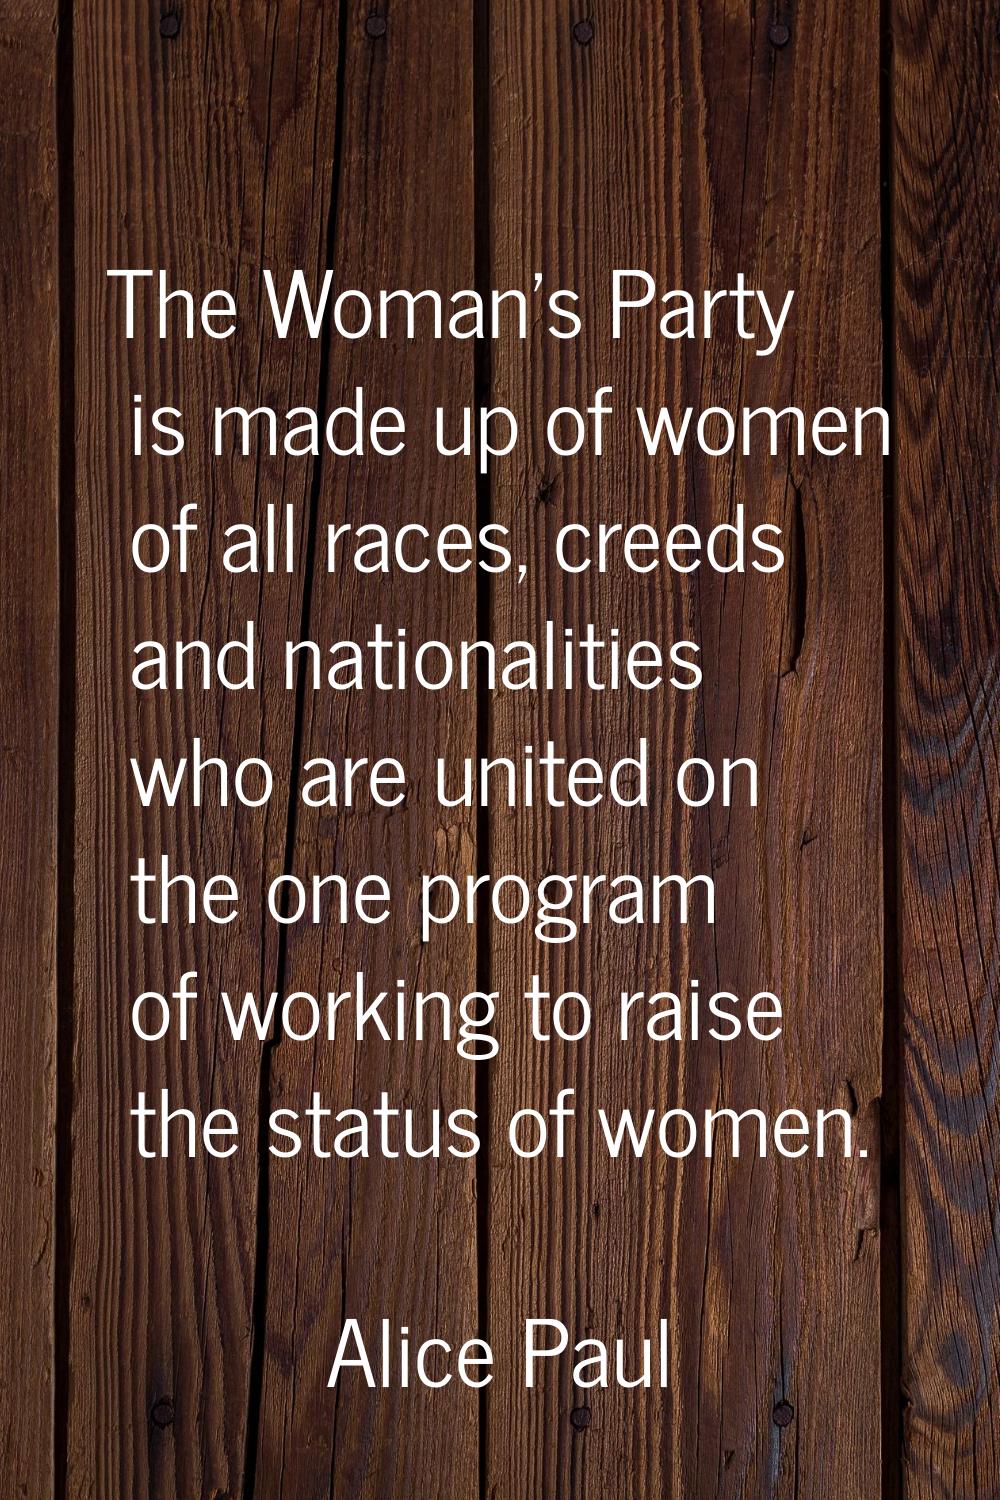 The Woman's Party is made up of women of all races, creeds and nationalities who are united on the 